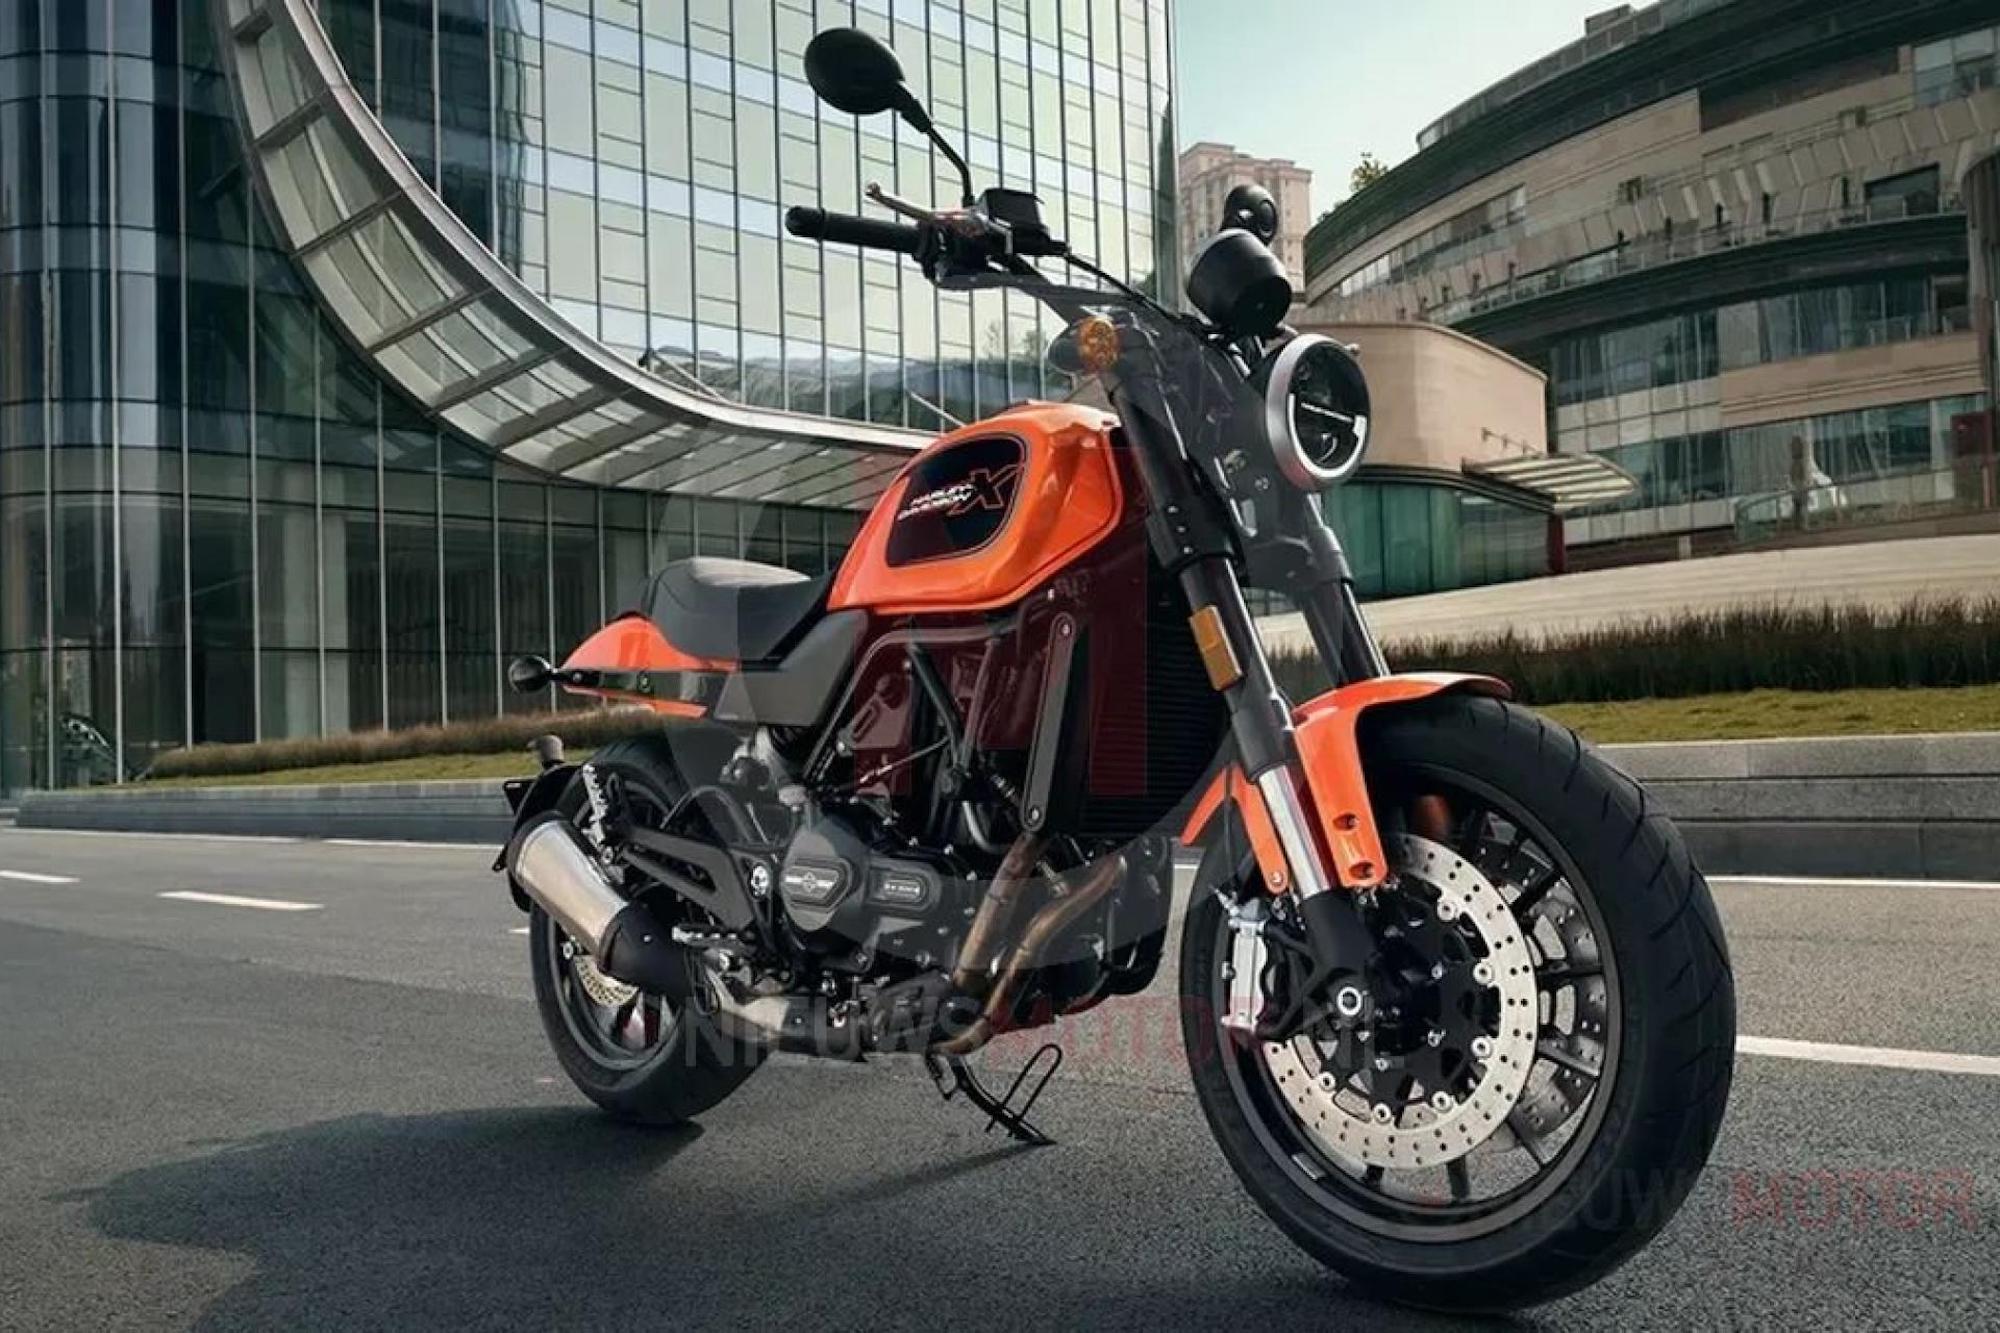 A view of Harley-Davidson's X500, created in collaboration with efforts from QJ Motors. Media sourced from Nieuwsmotor.